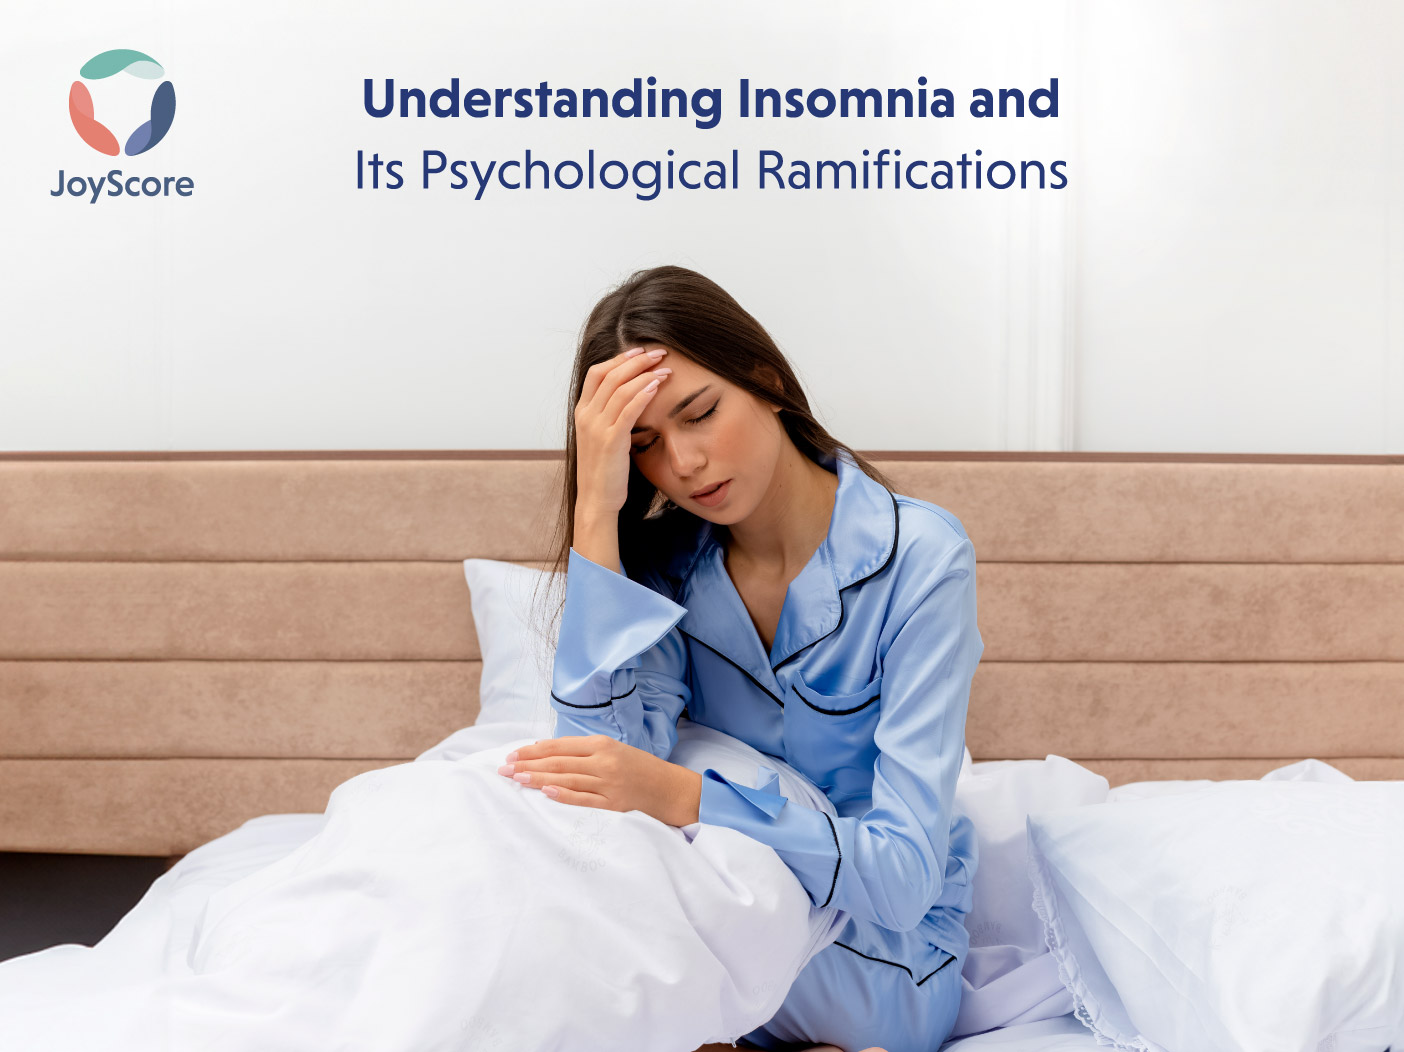 Insomnia Uncovered: Understanding Insomnia And Its Psychological Ramifications